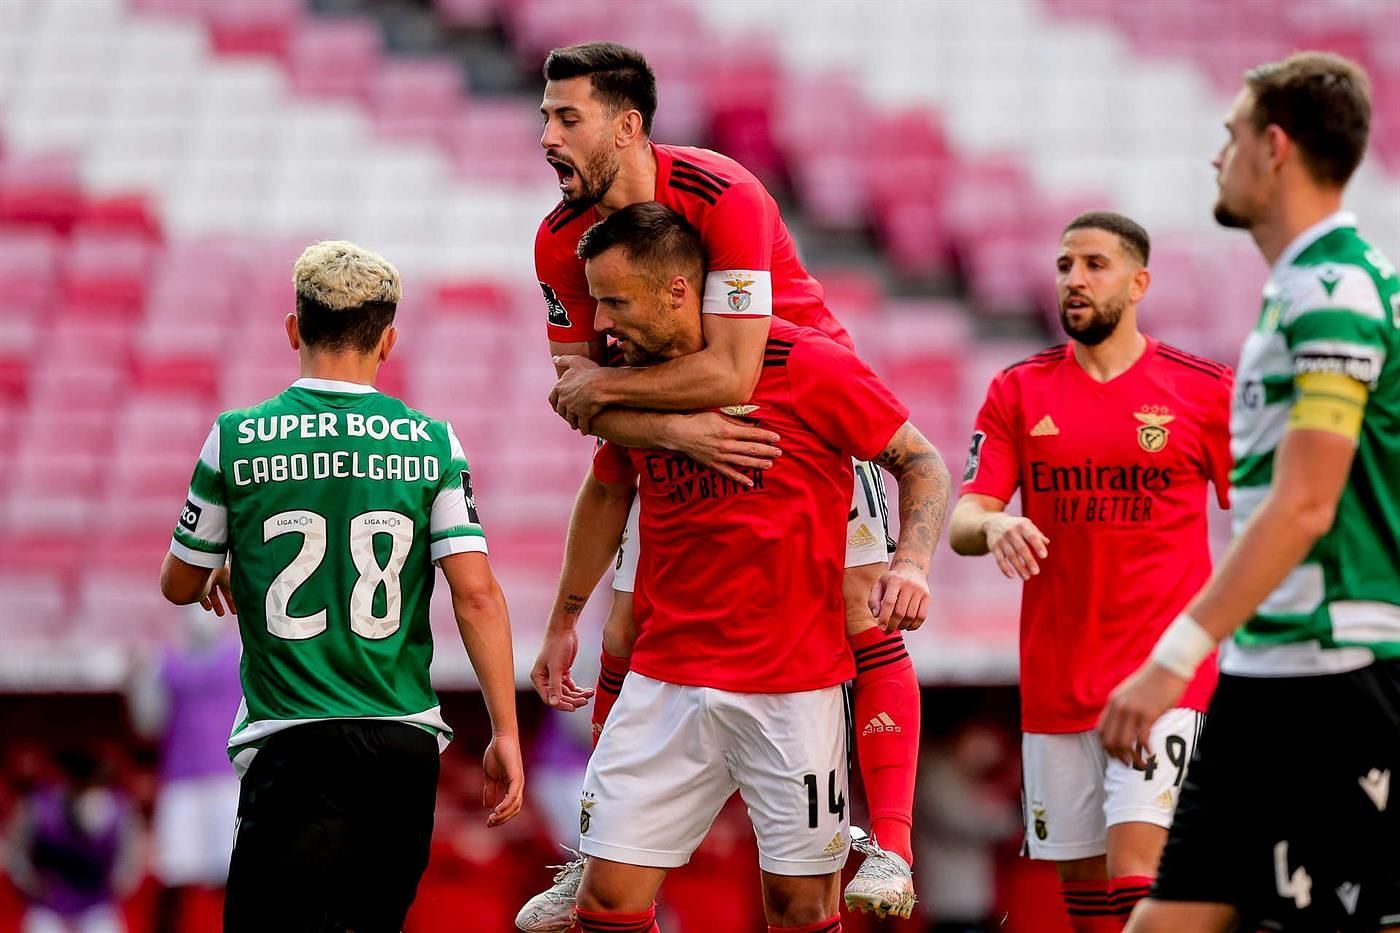 Sporting face Lisbon rivals Benfica in a crucial Primeira Liga fixture on Sunday